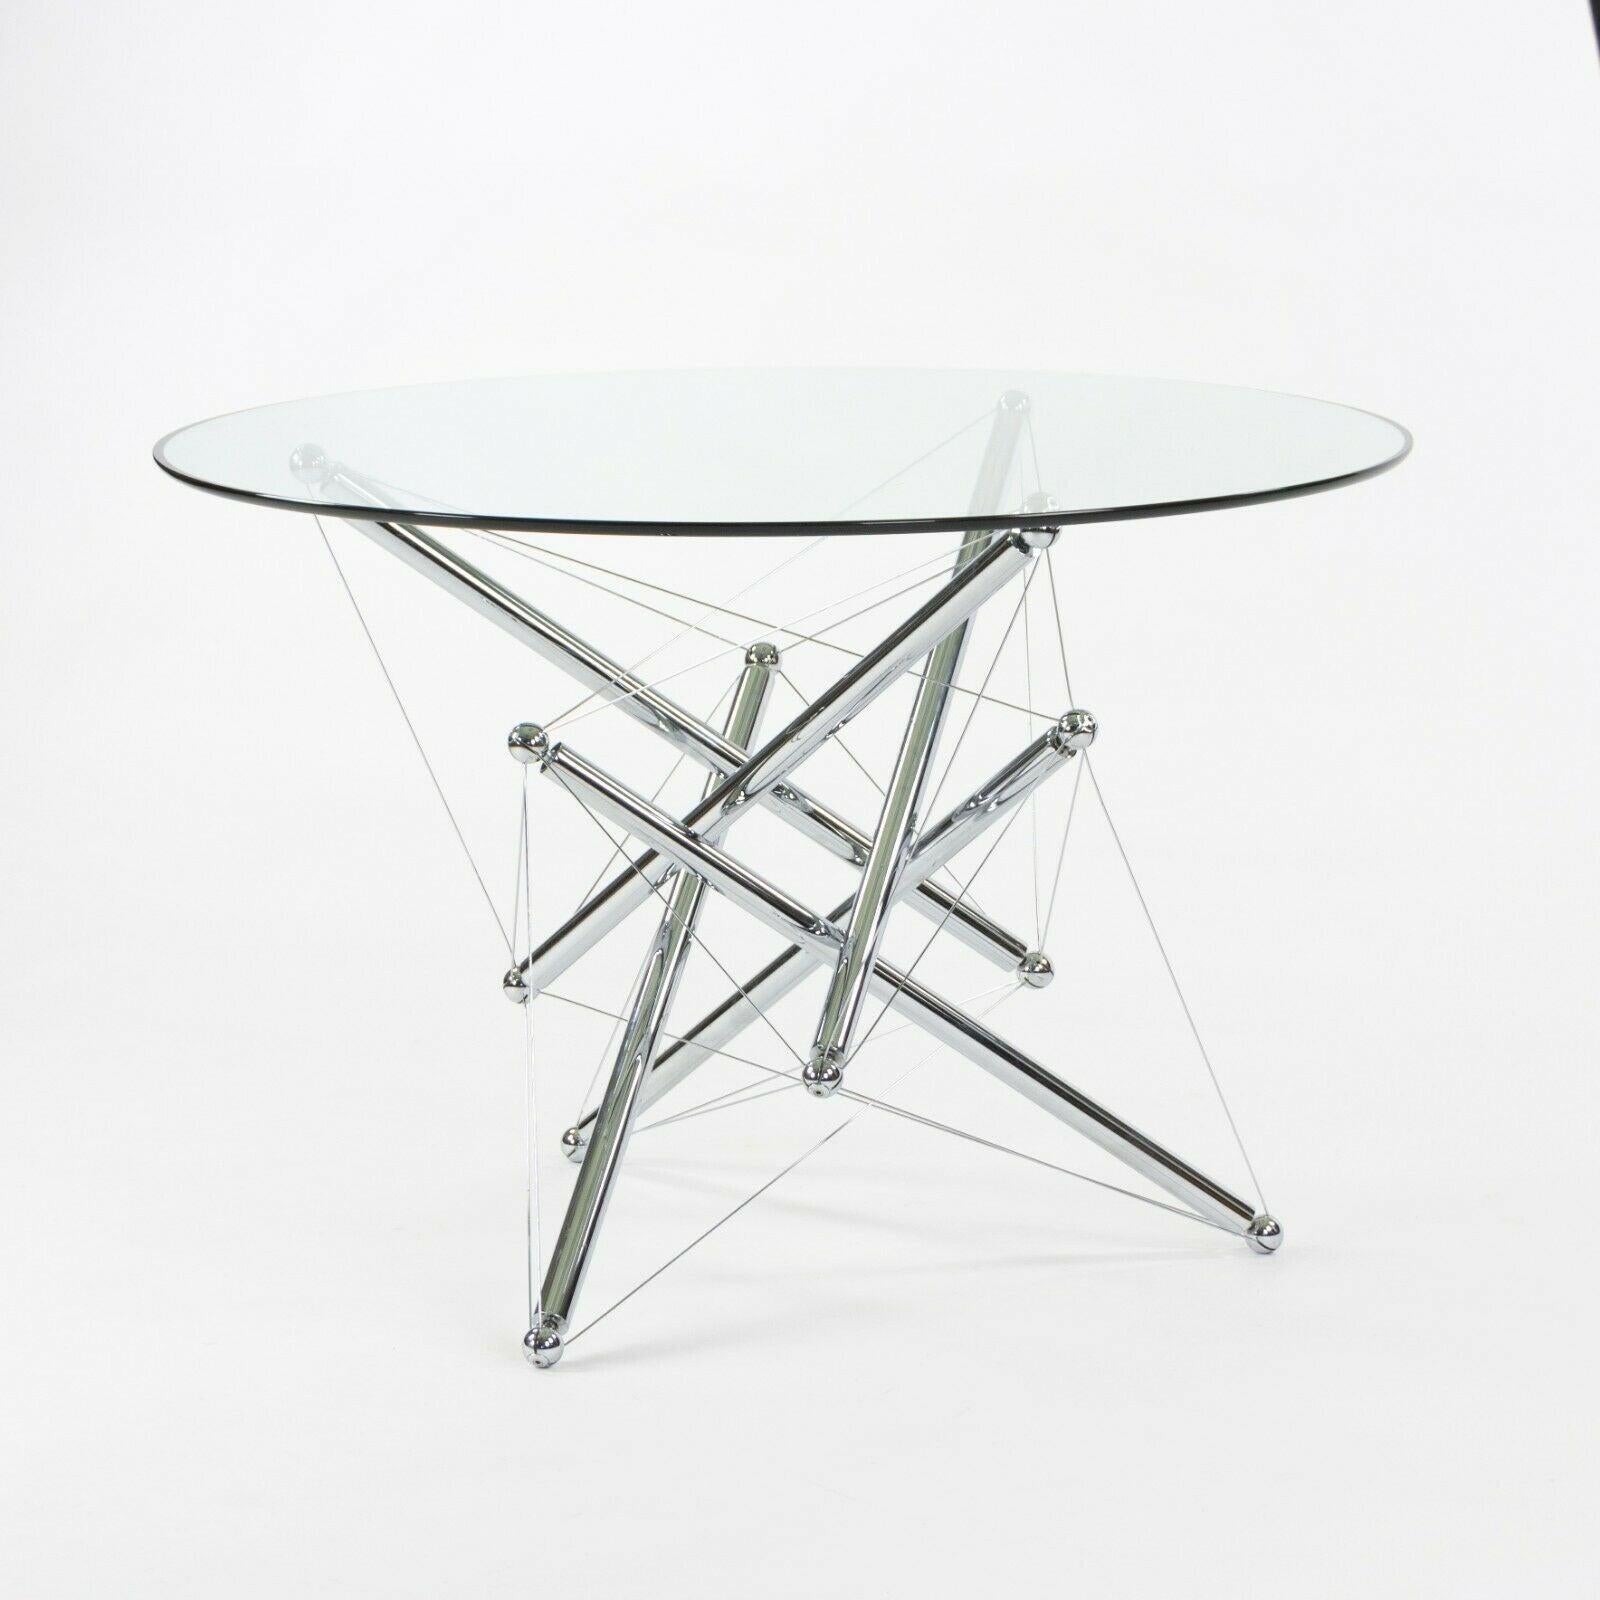 Listed for sale is a gorgeous and original 714 dining table, produced by Cassina. This table was designed by Theodore Waddell and was created after being inspired by Buckminster Fuller's tensile and tensegrity structures. The base uses cables to act